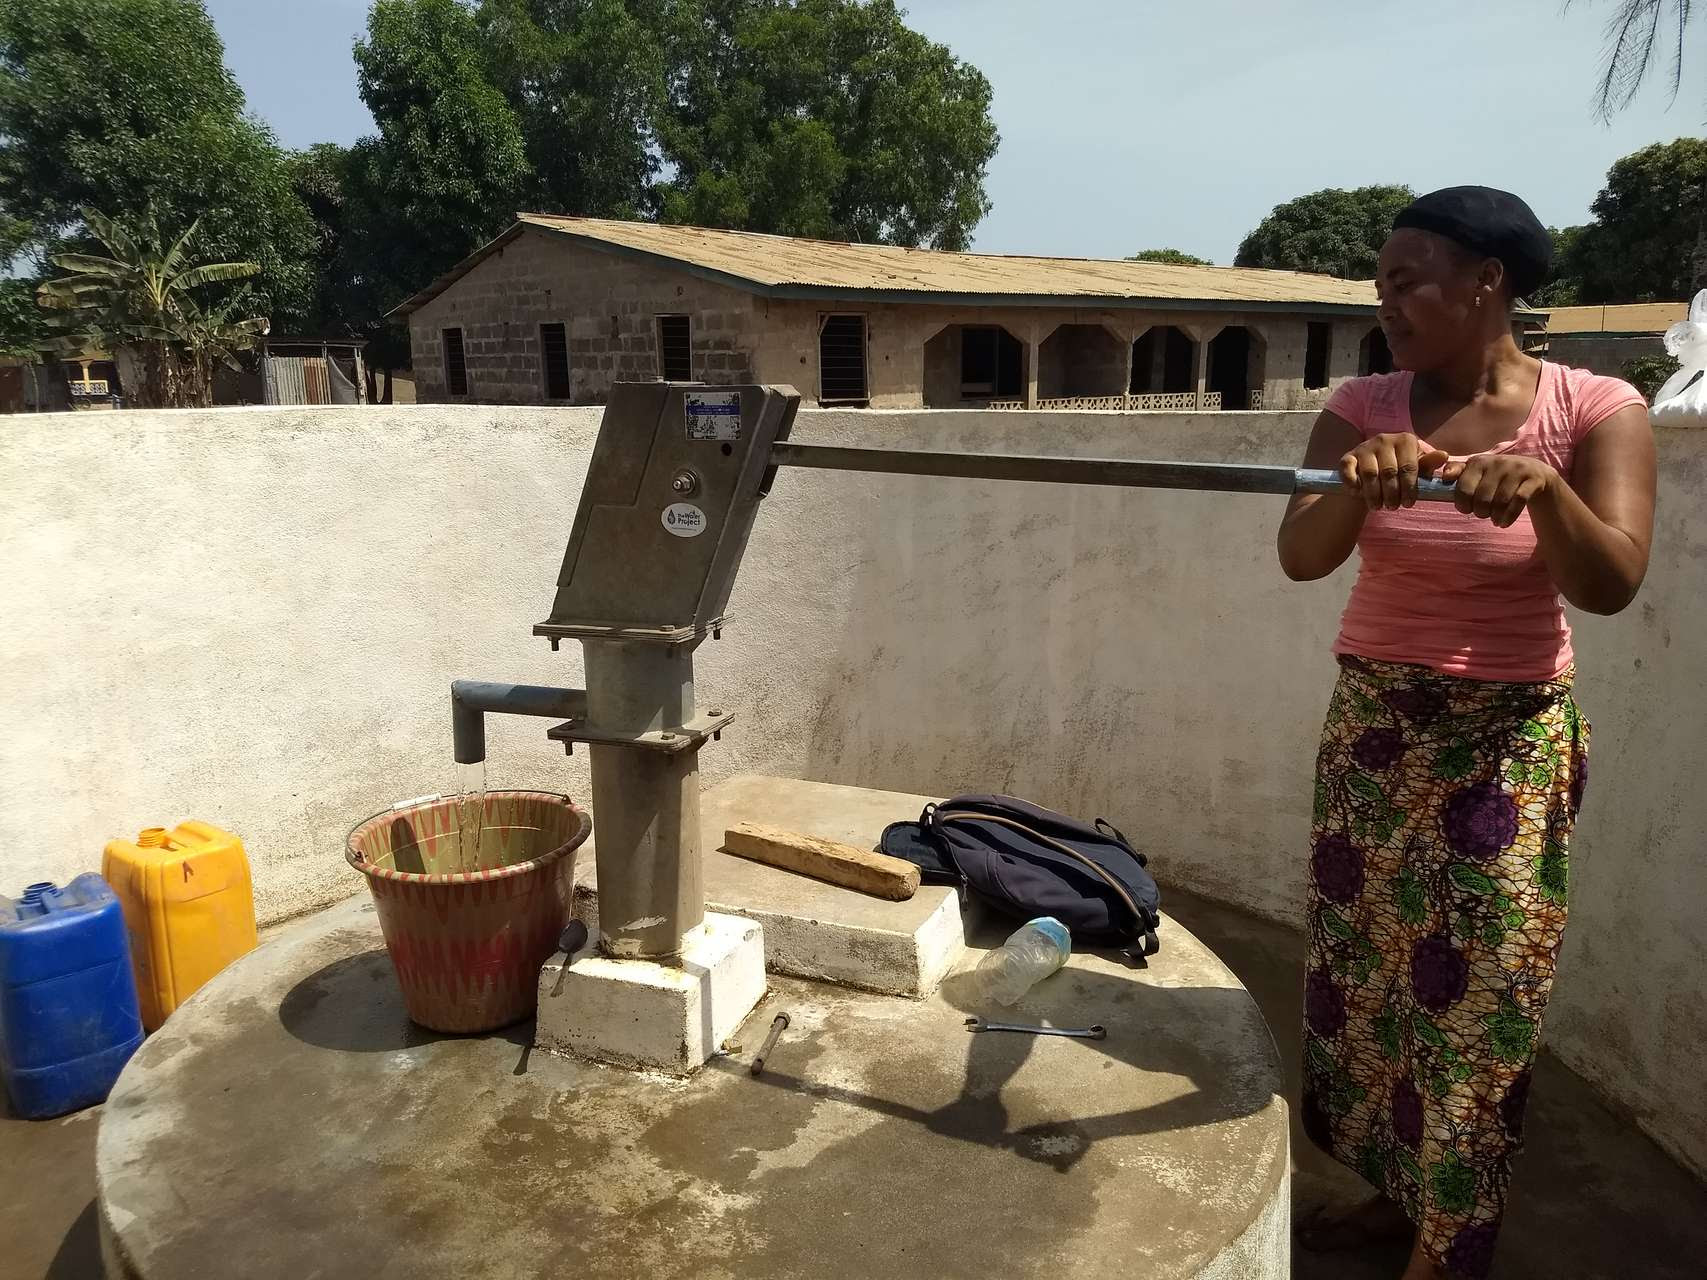 NEW update from the Water Project in Sierra Leone - See how Nandansons Charitable Foundation helped!